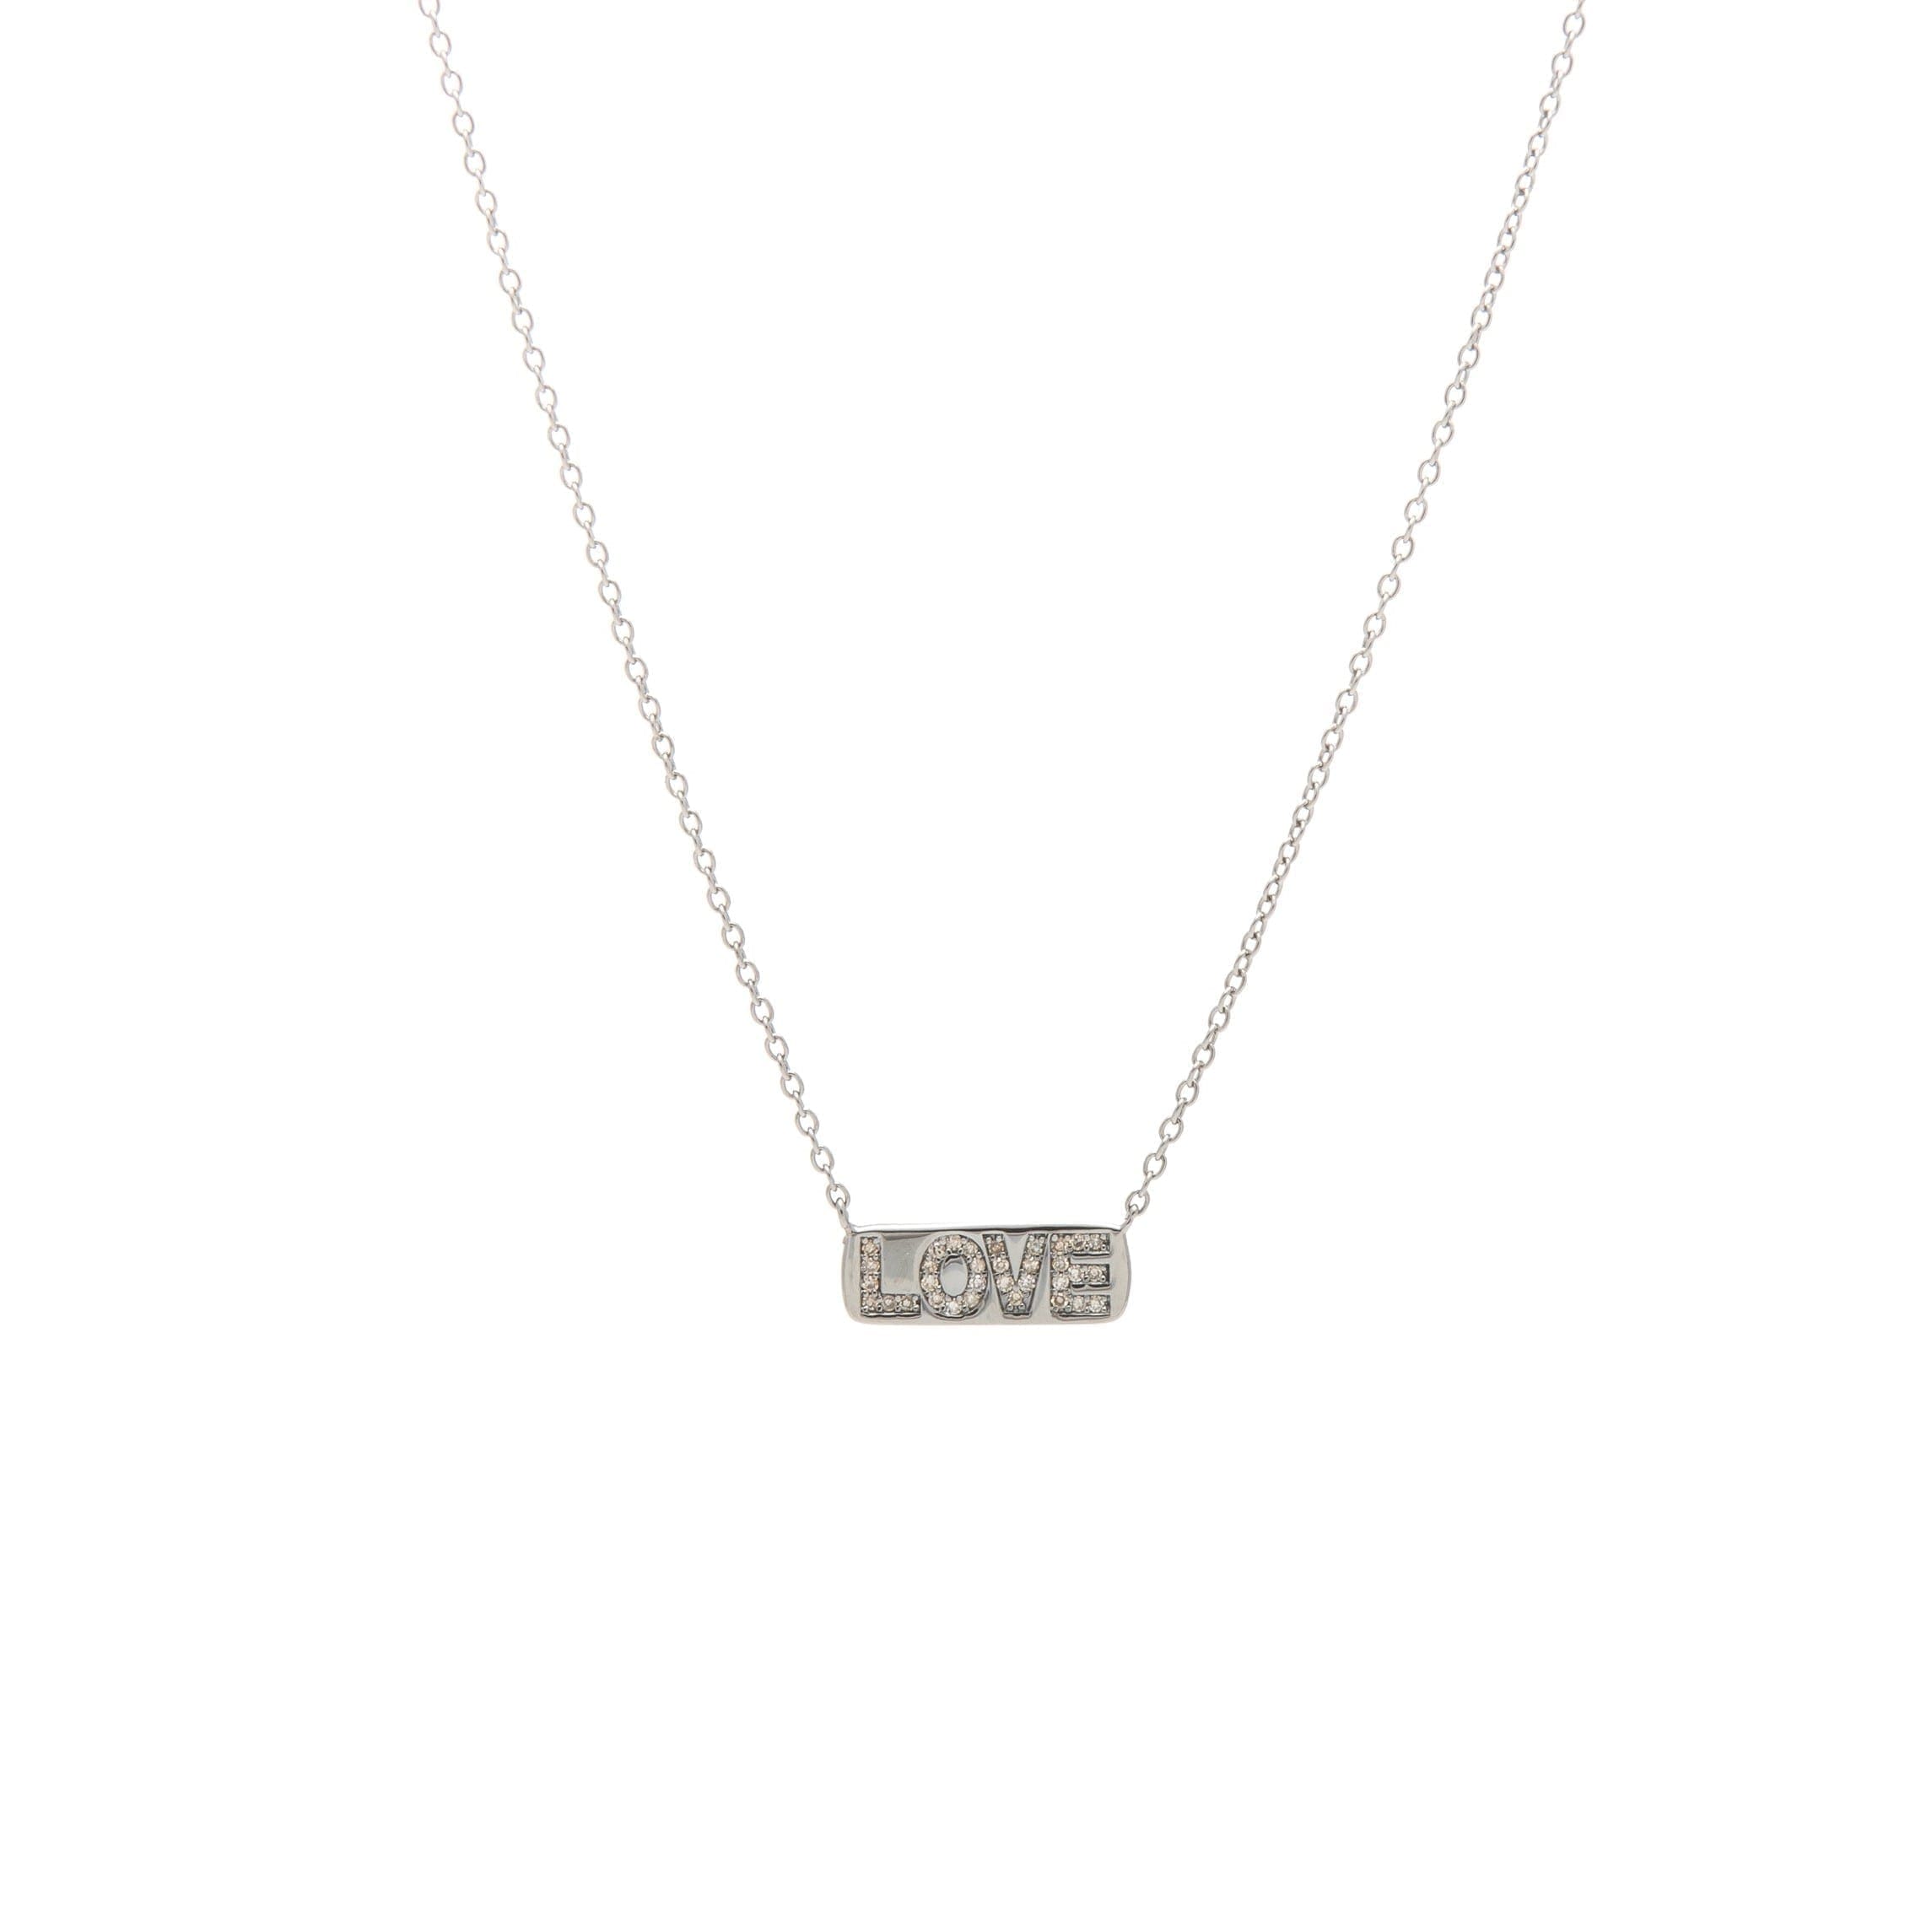 Personalized Diamond-Accent Sterling Silver Nameplate Necklace - JCPenney